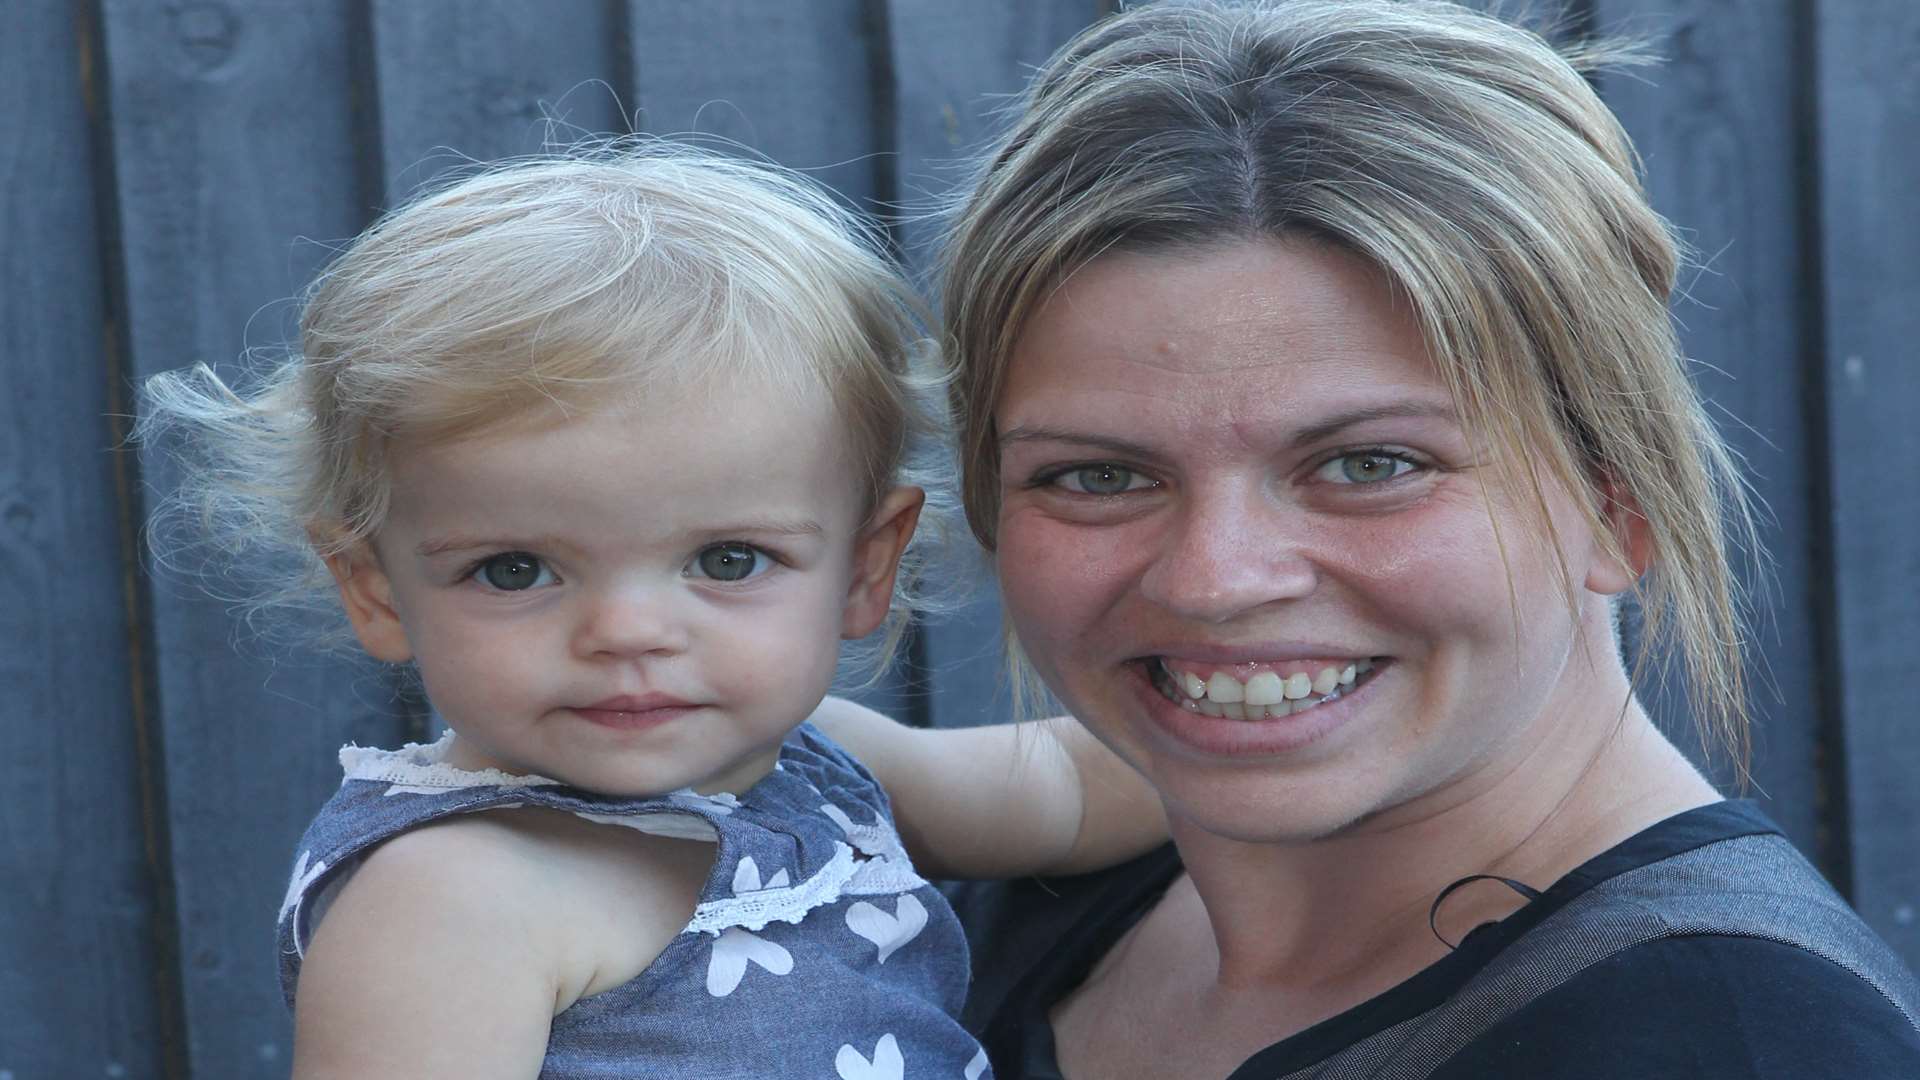 Kelly Wells, who started the project, with her daughter Summer